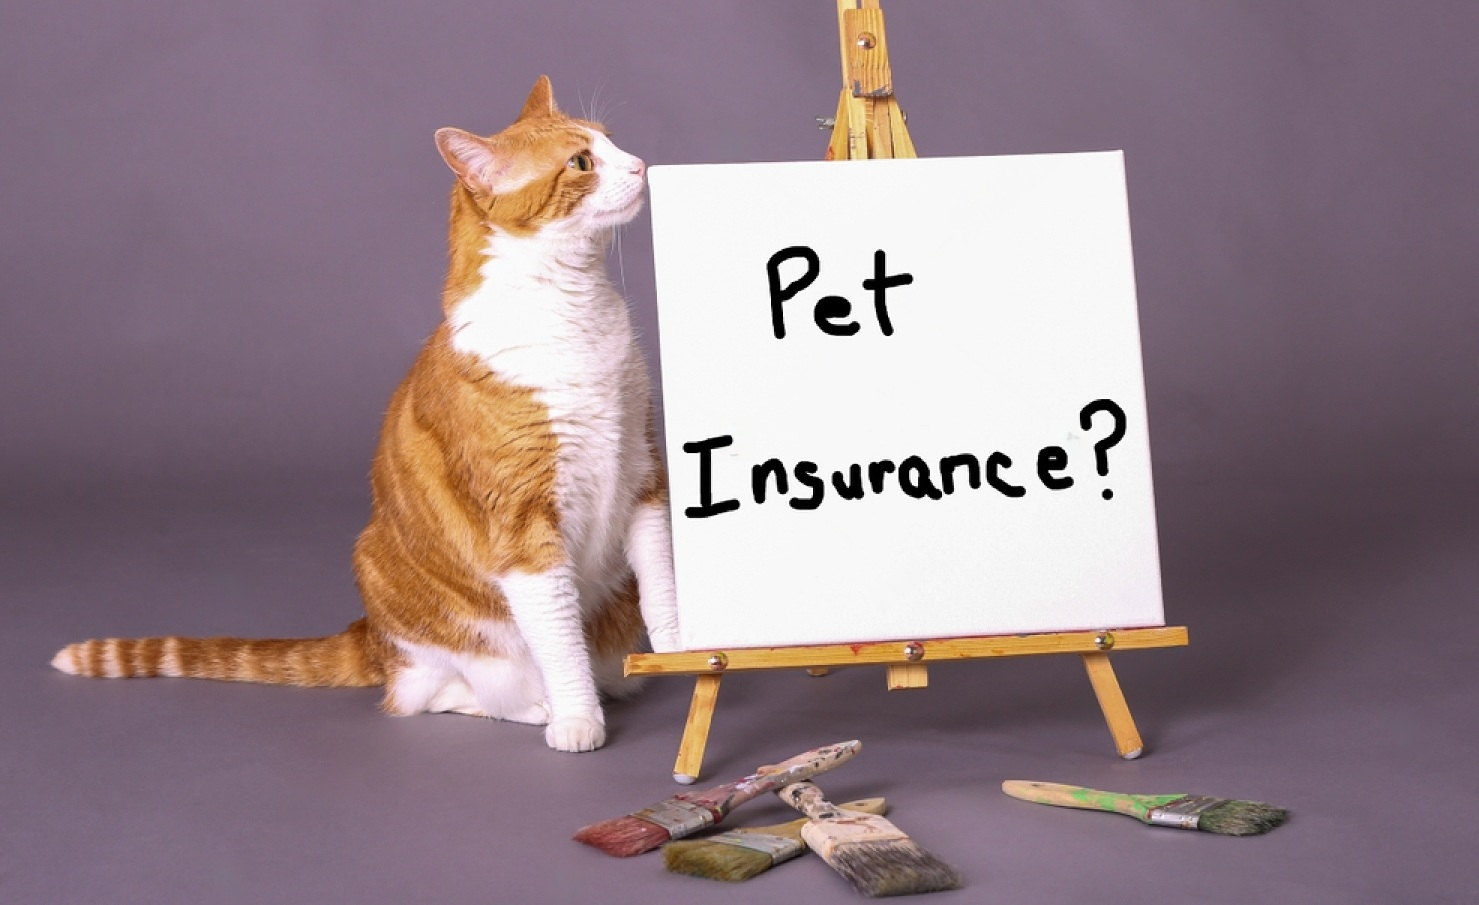 How Much Is Pet Insurance?